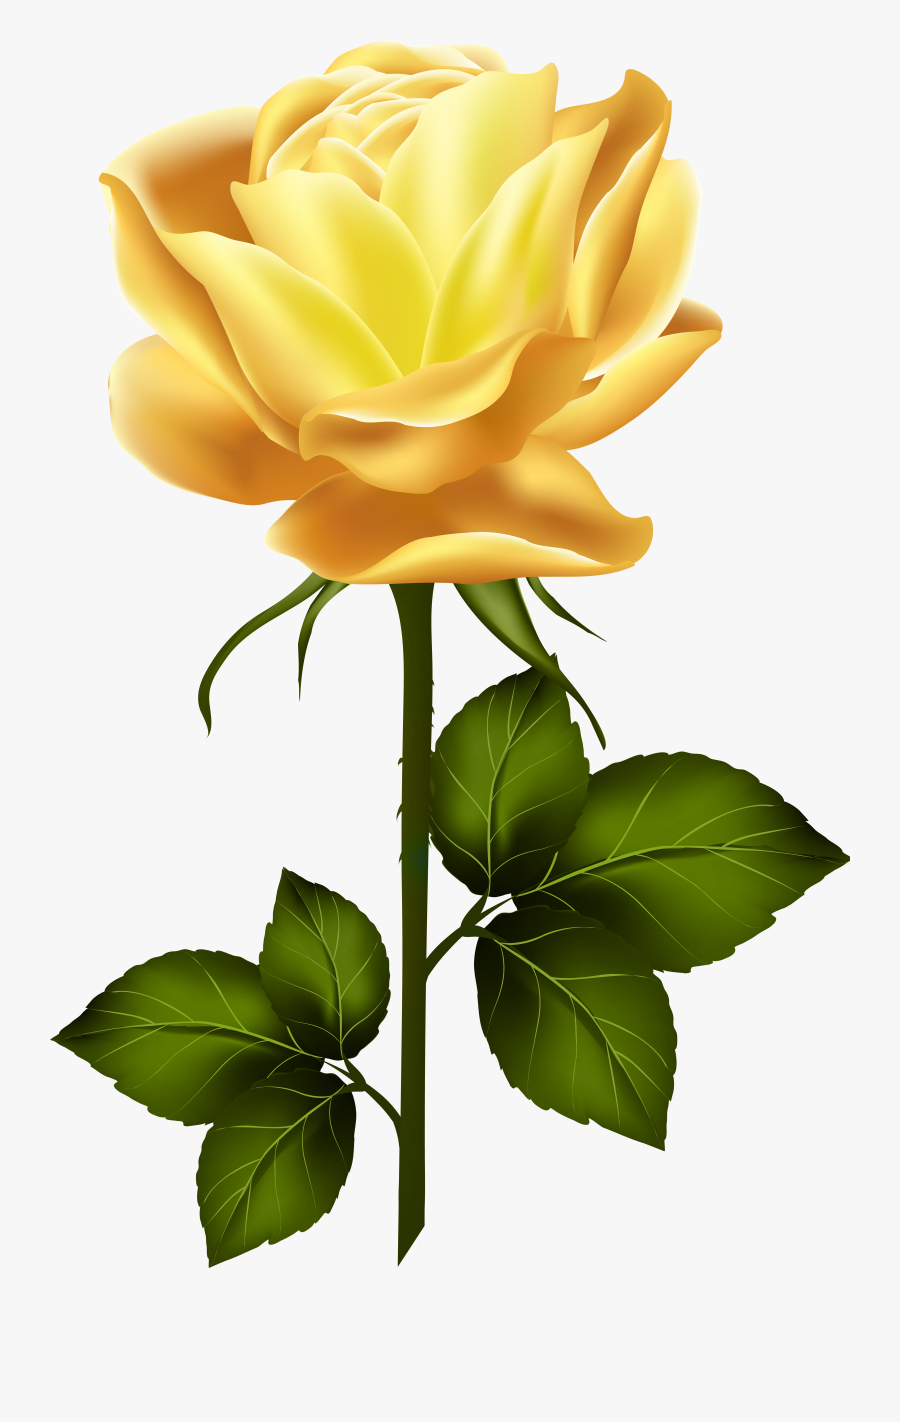 Clipart Roses Yellow Rose - Yellow Rose With Stem, Transparent Clipart